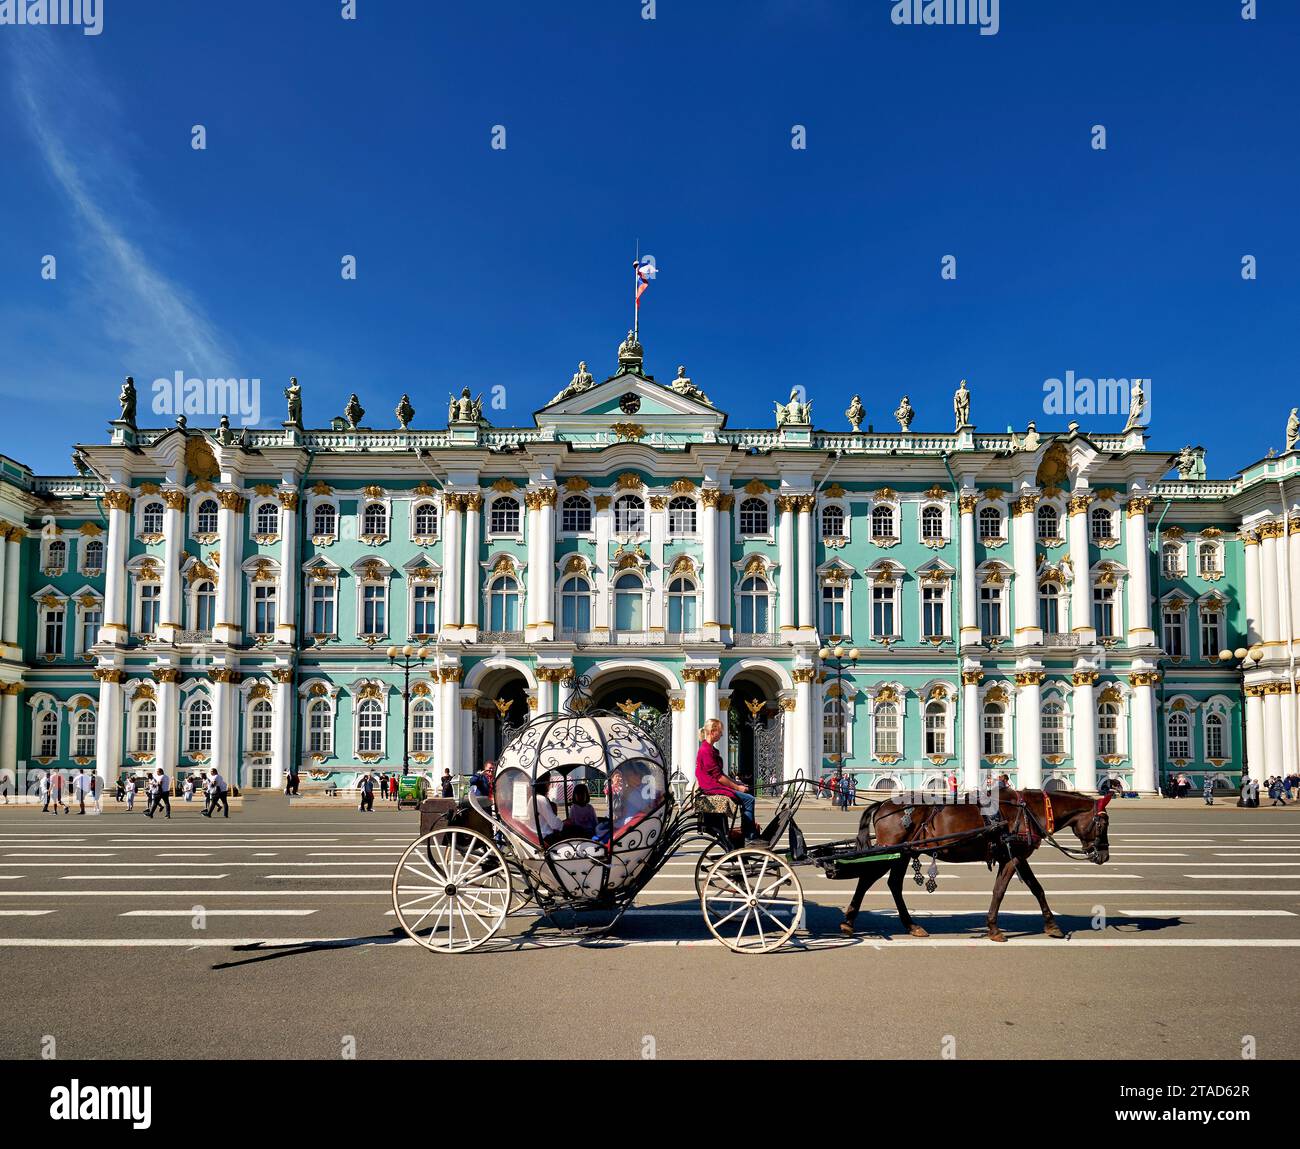 St. Petersburg Russia. The Winter Palace Hermitage Museum Stock Photo